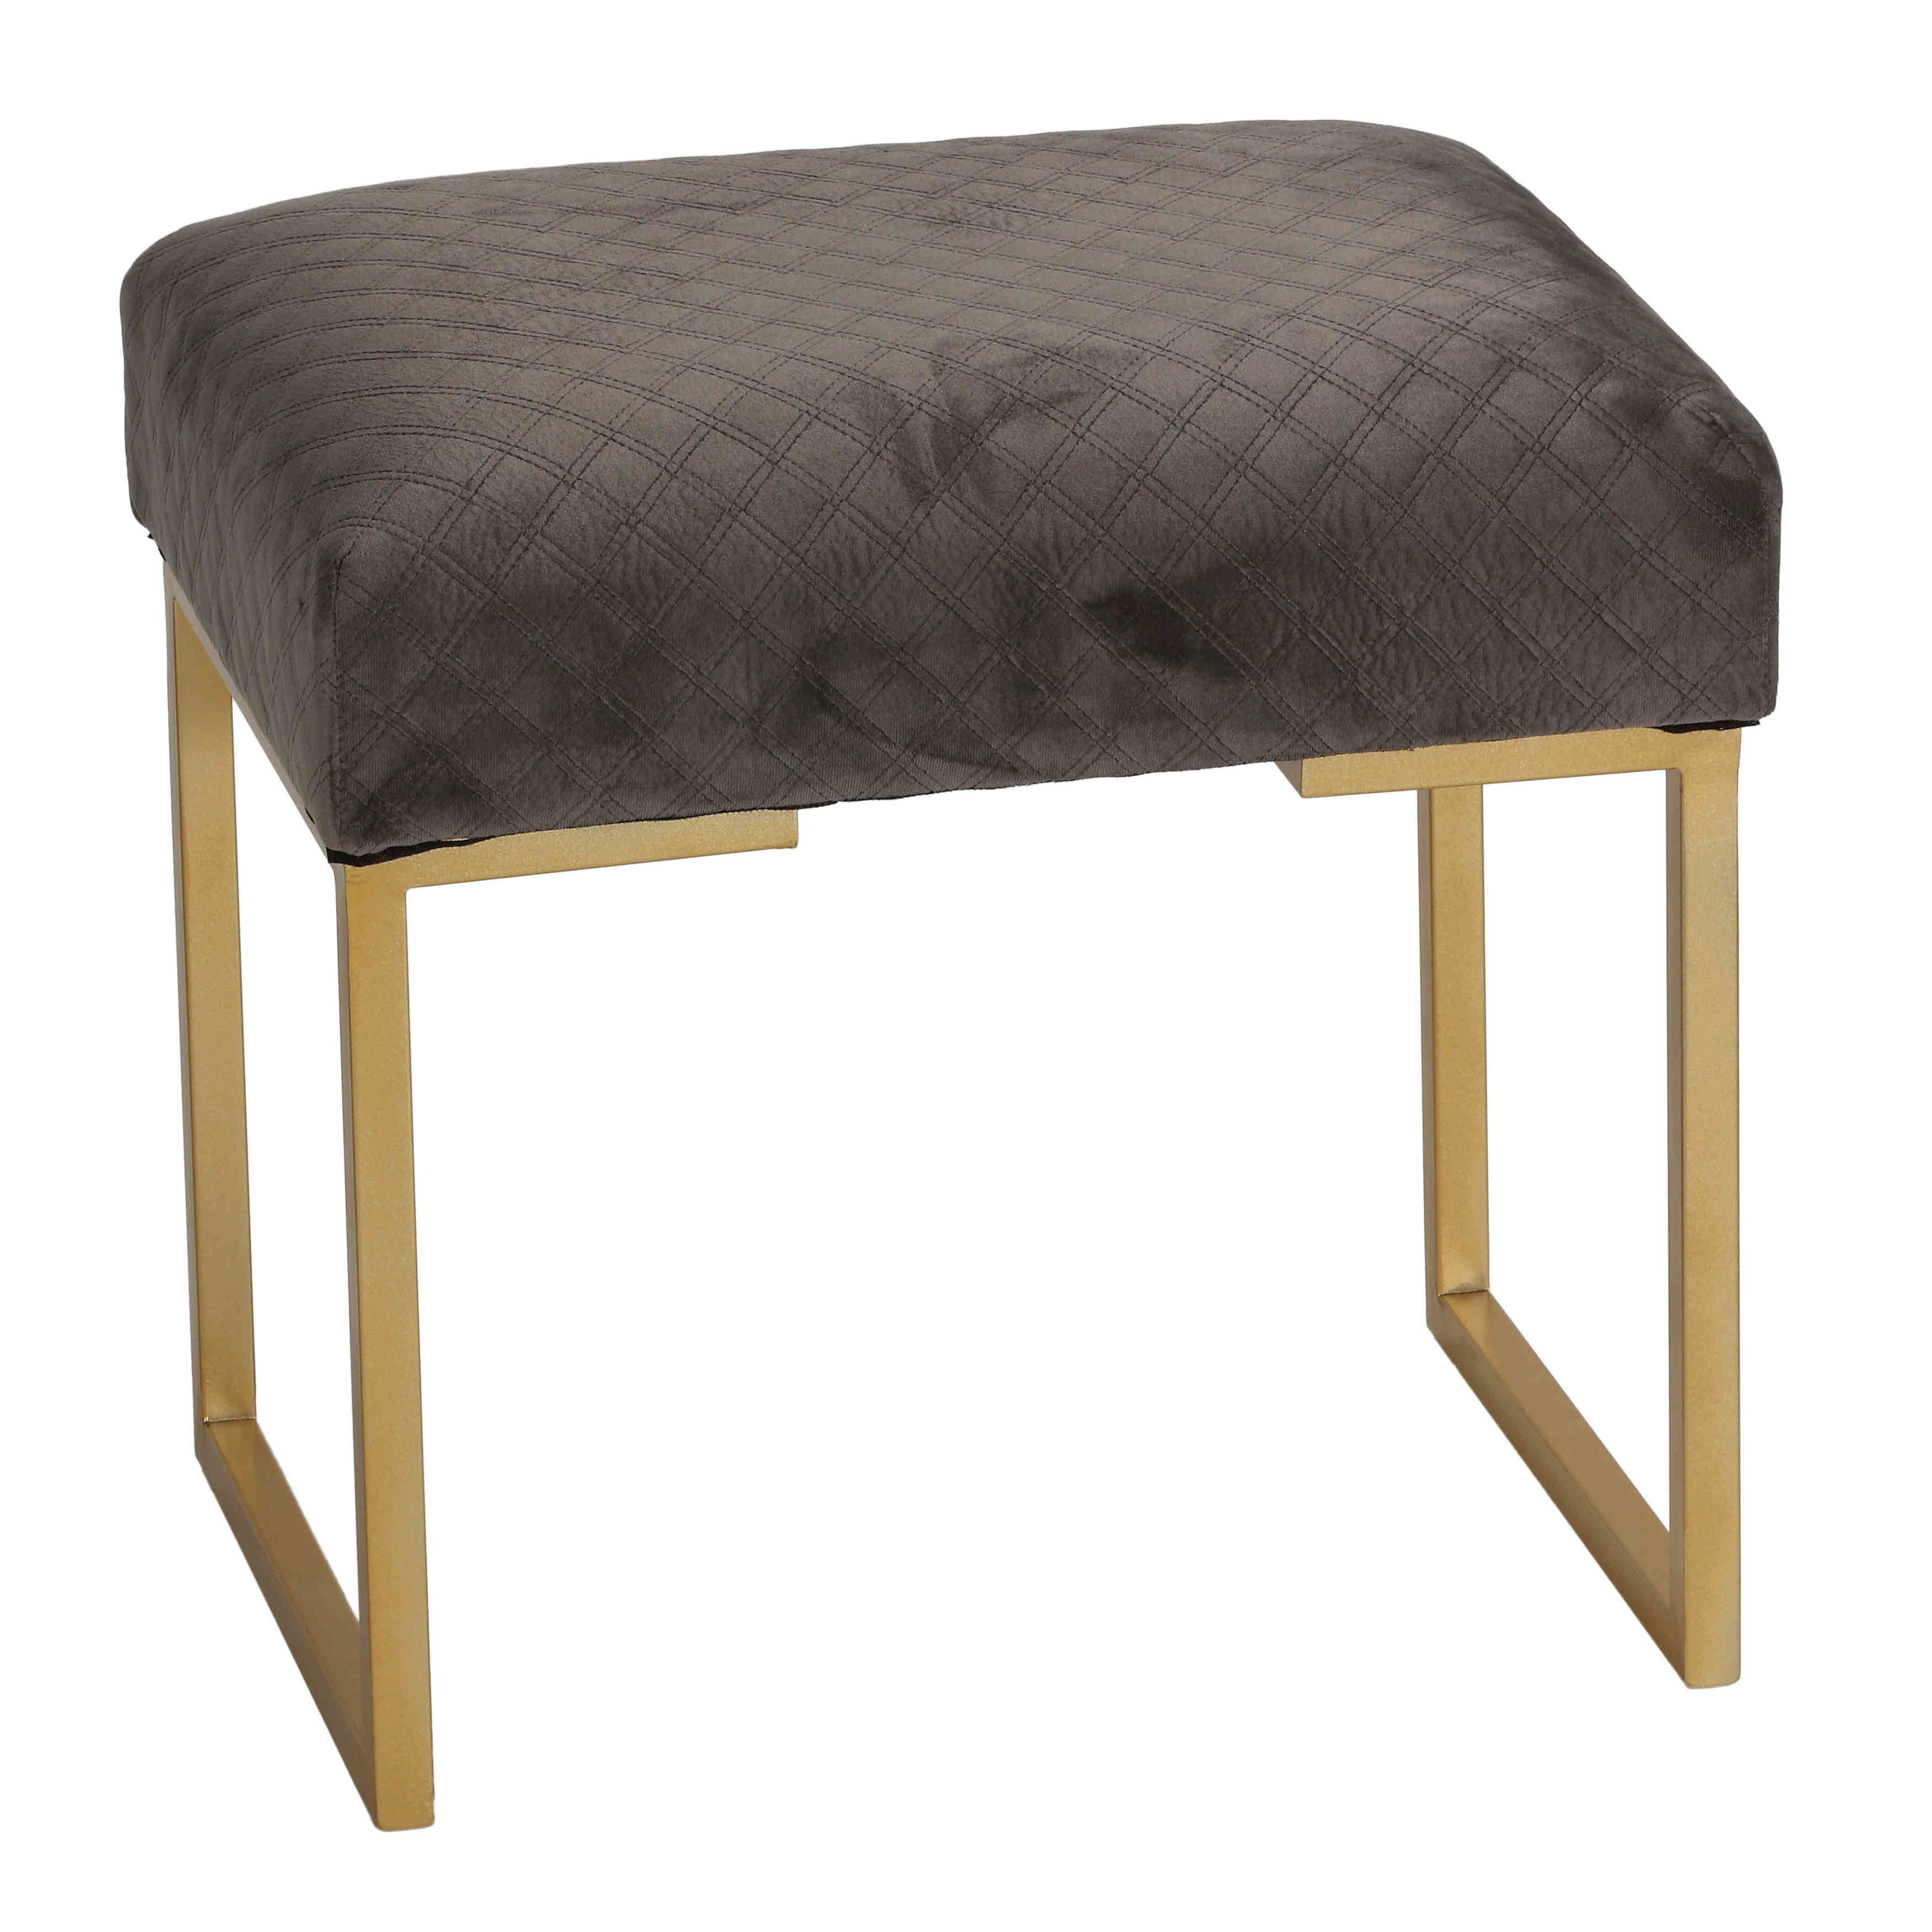 Cortesi Home Allium Ottoman with Painted Gold Legs, 19 inch Wide, Gray Velvet